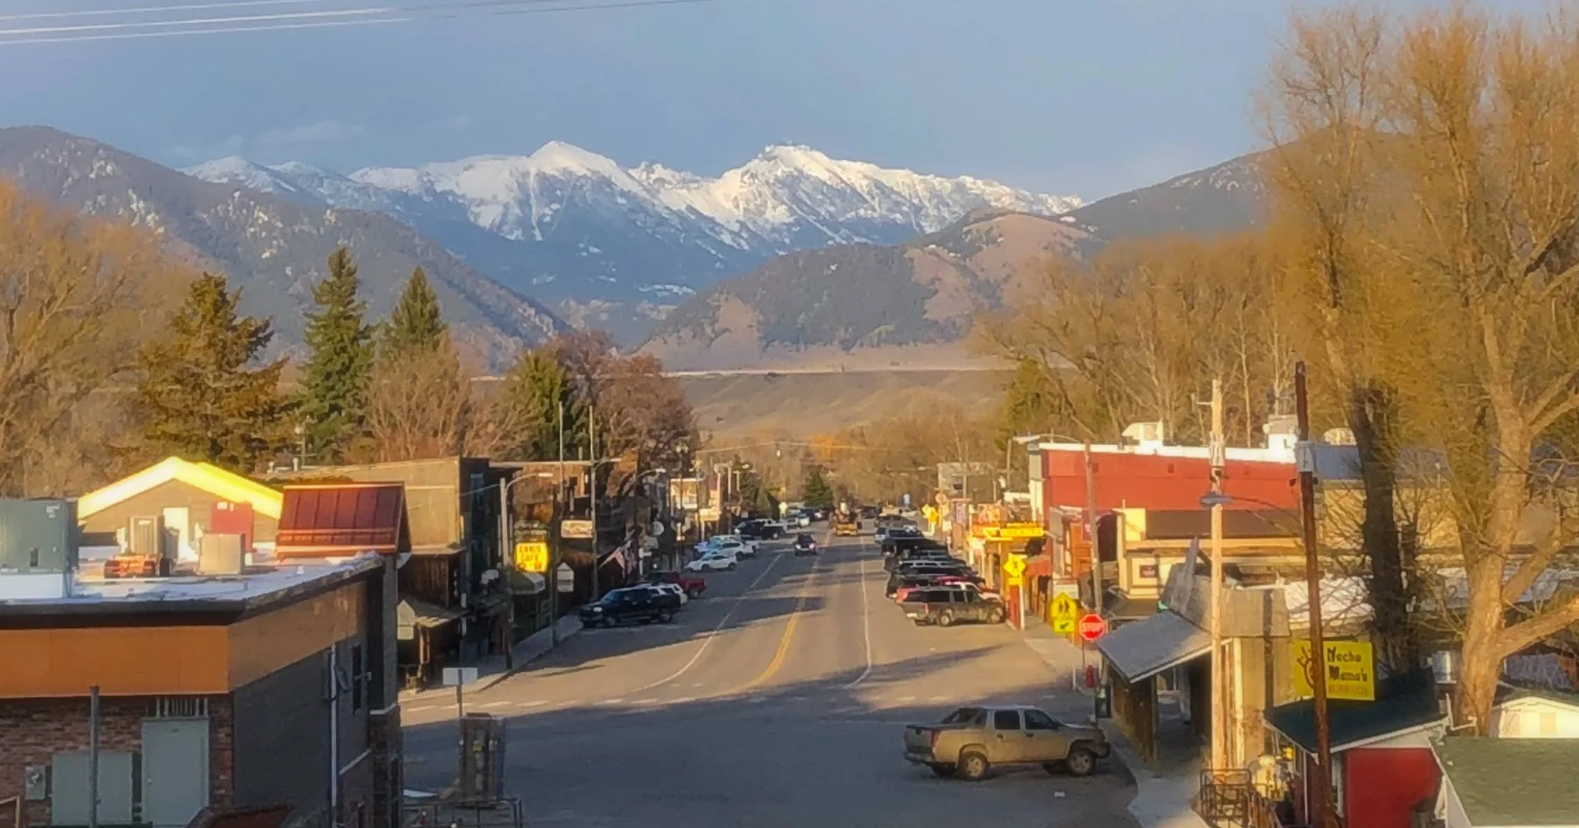 A street in a small town with mountains in the background.